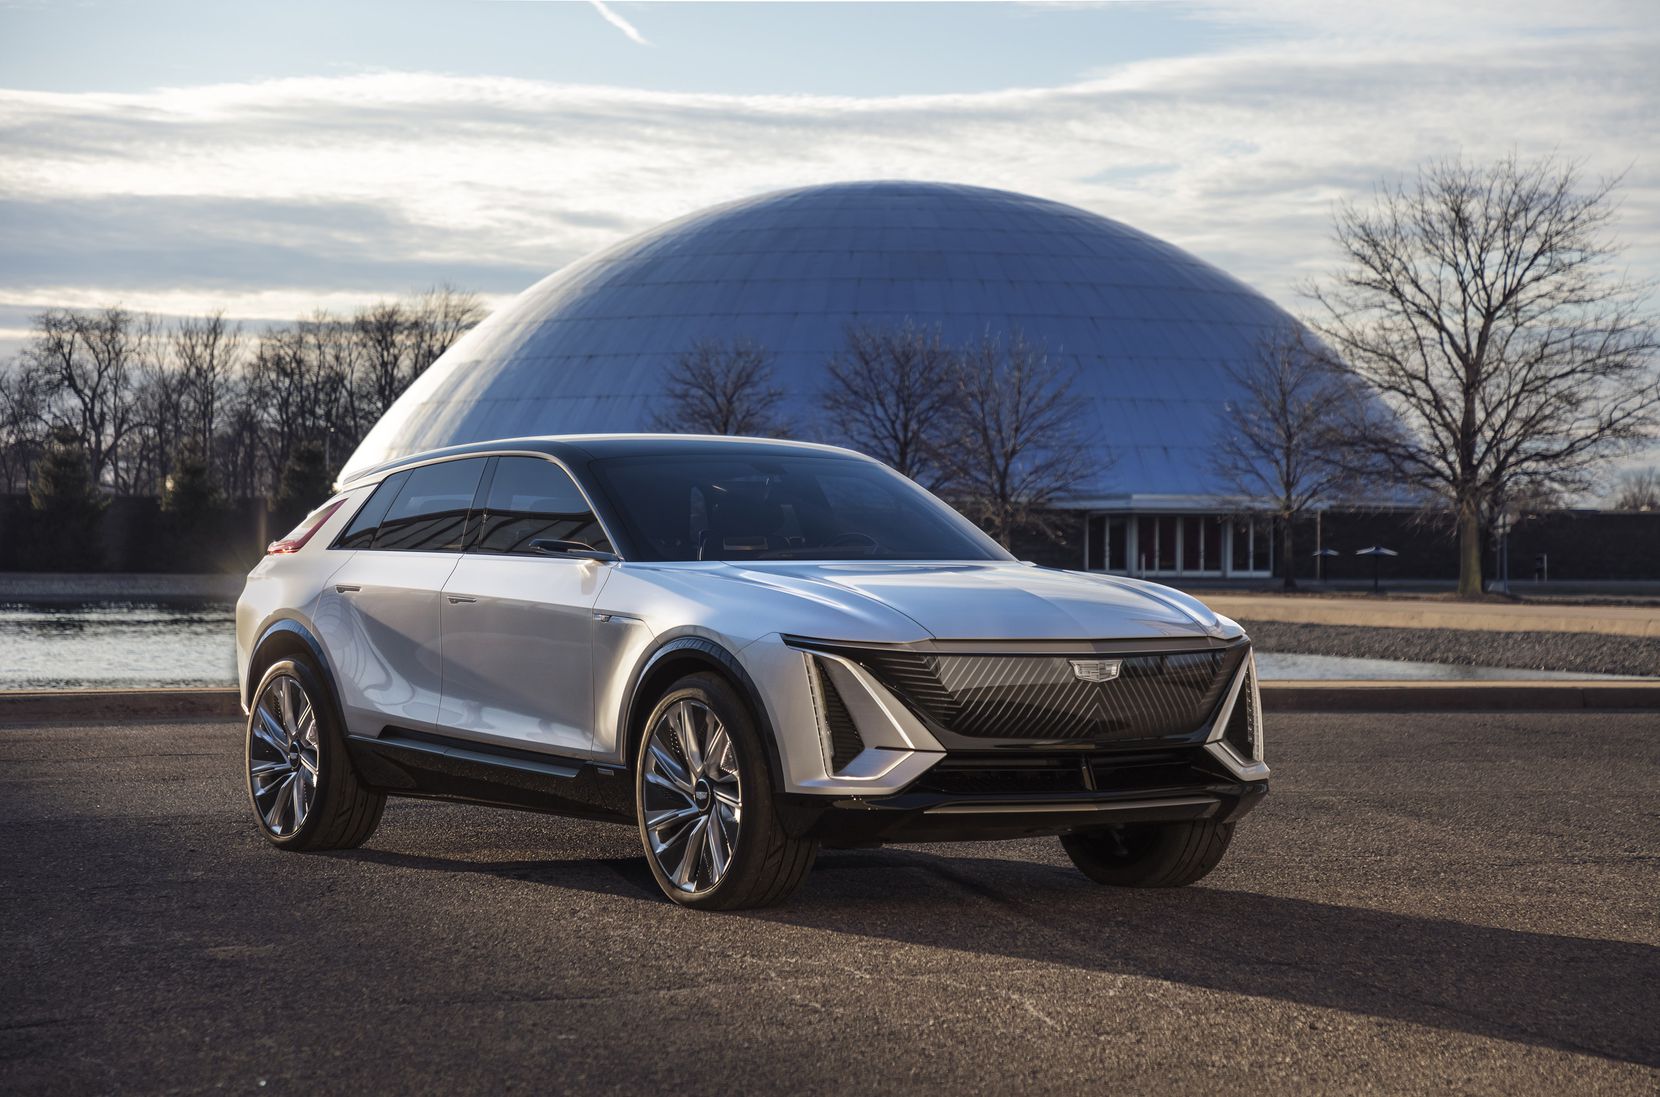 The Cadillac Lyriq pairs next-generation battery technology with a bold design.